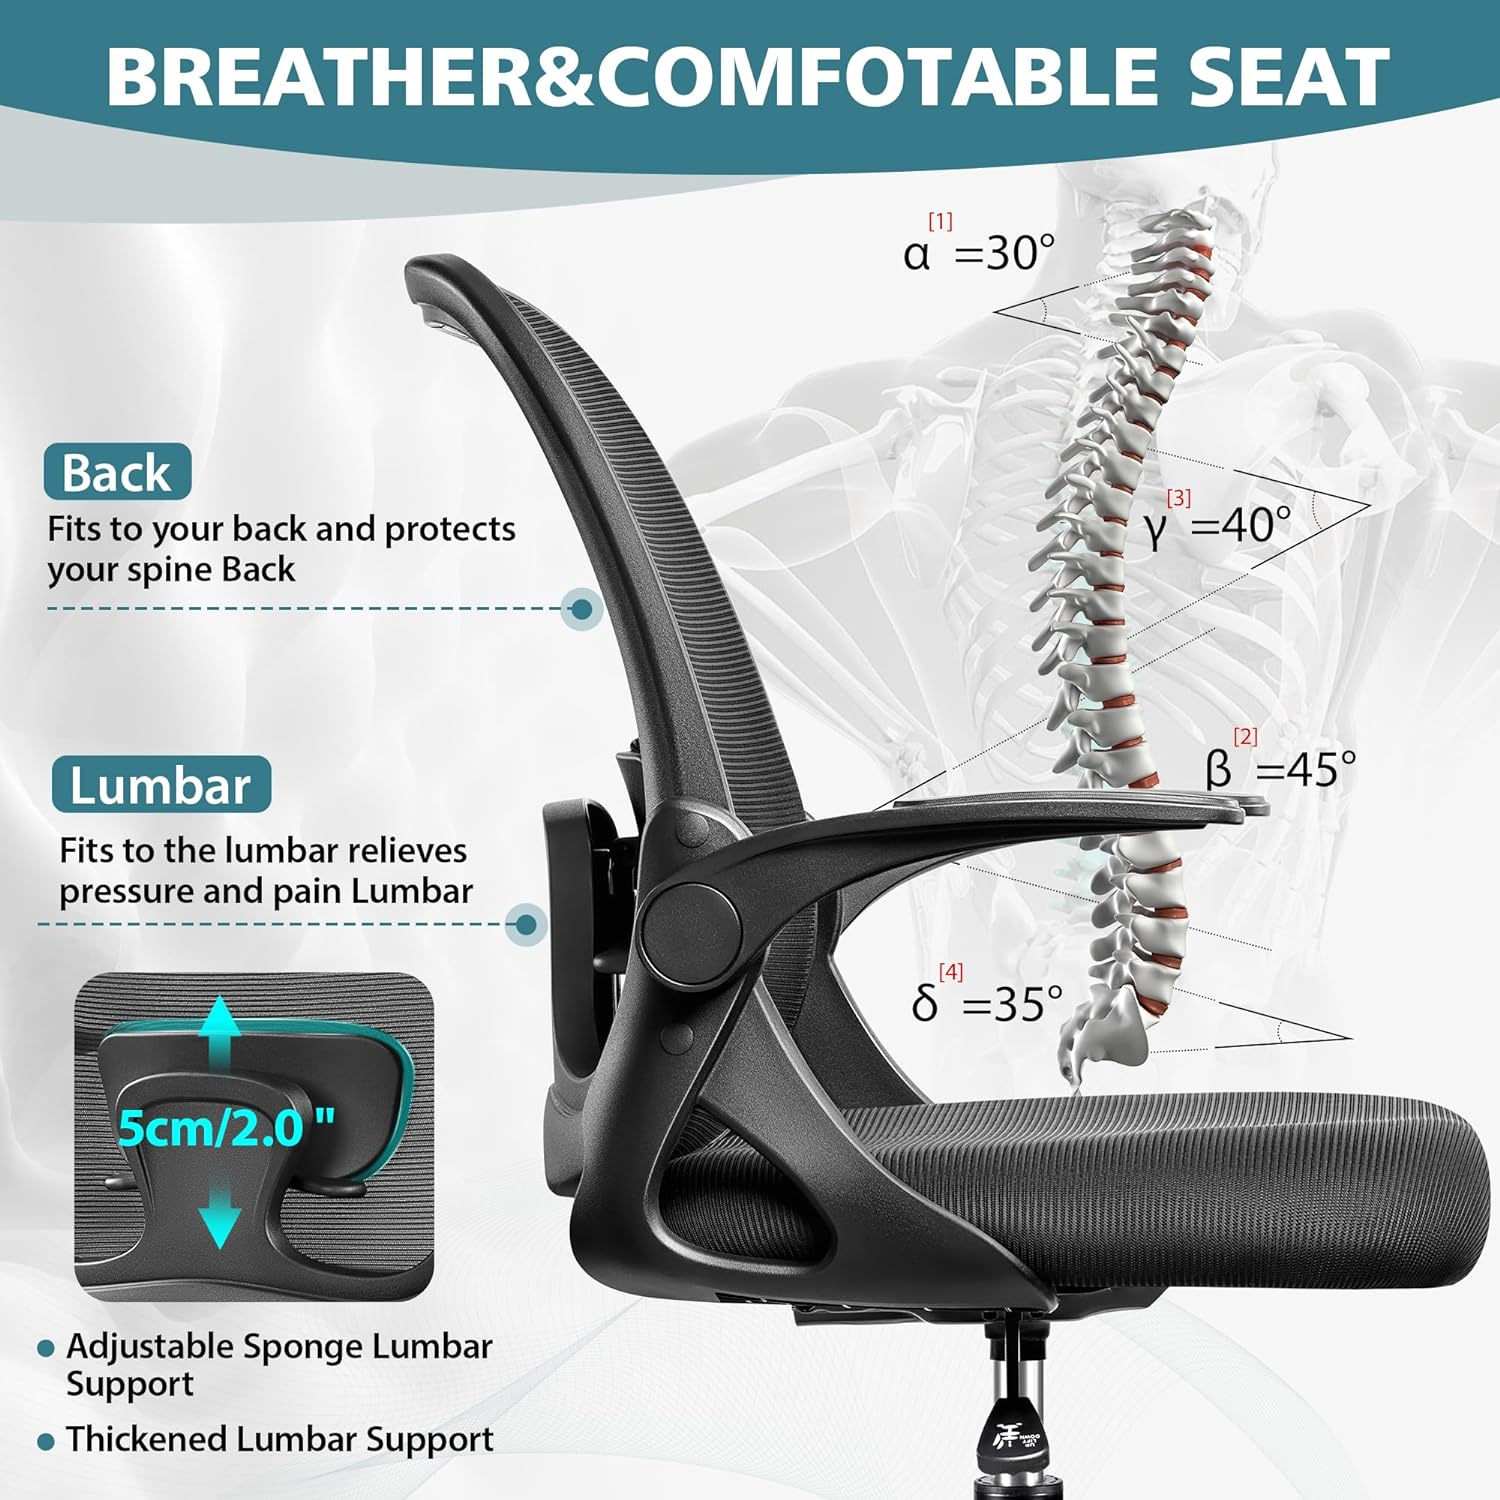 Ergonomic Office Drafting Chair with adjustable Lumbar Support